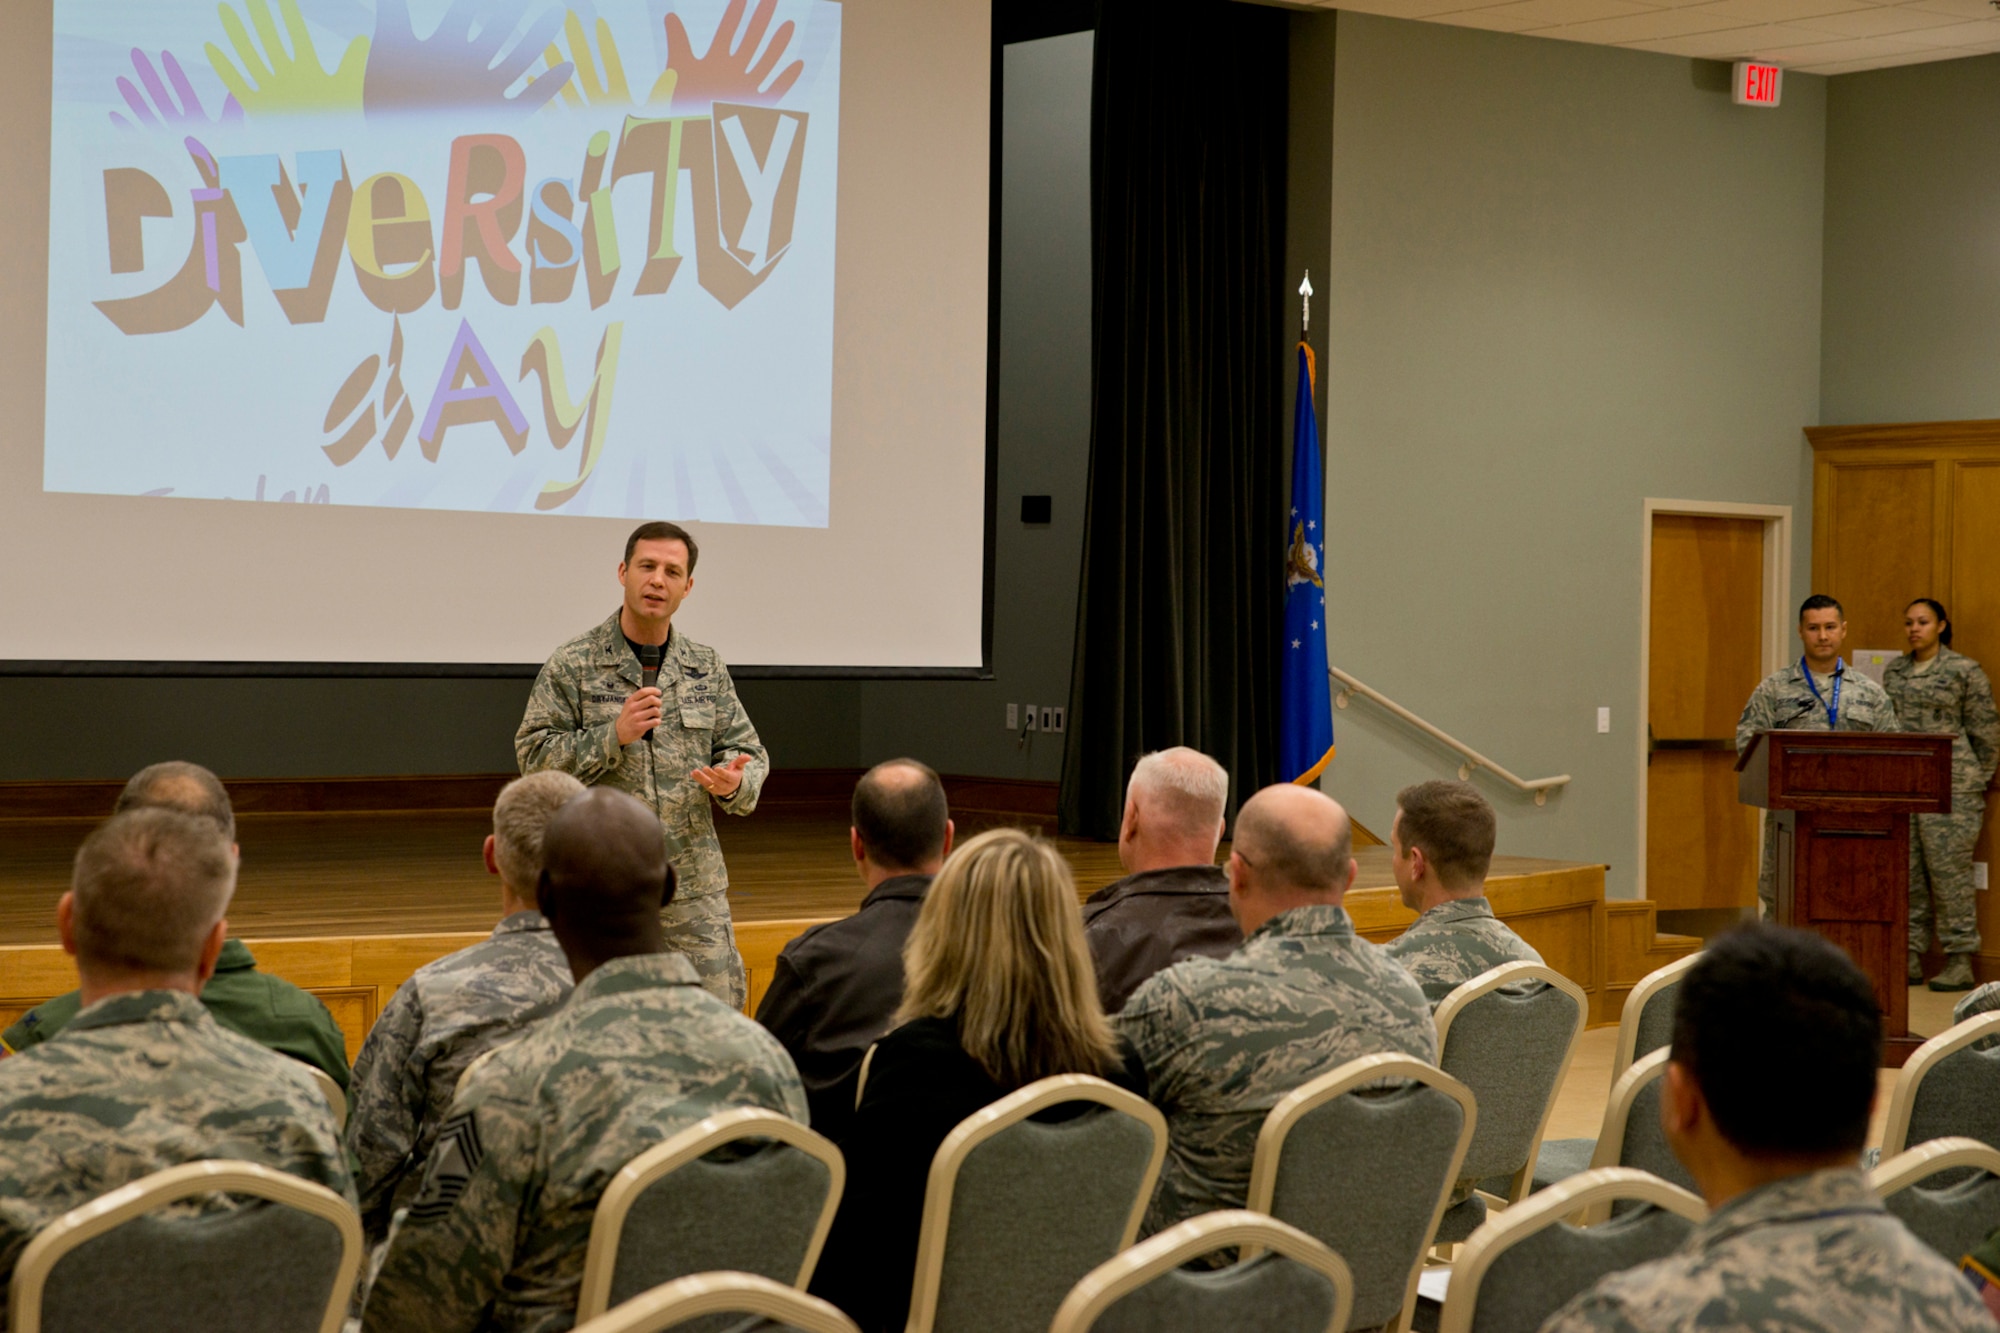 U.S. Air Force Col. James Dryjanski, commander, 314th Airlift Wing, speaks to attendees during the opening ceremony of the Team Little Rock Diversity Day 2016 celebration in the Walter Community Support Center, Jan. 15, 2016, at Little Rock Air Force Base, Ark. The Diversity Day event was held to celebrate the life, history, and culture of the nation’s Servicemen and women, and offered those who attended an opportunity to experience cultural performances and sample food from around the world. (U.S. Air Force photo by Master Sgt. Jeff Walston/Released)